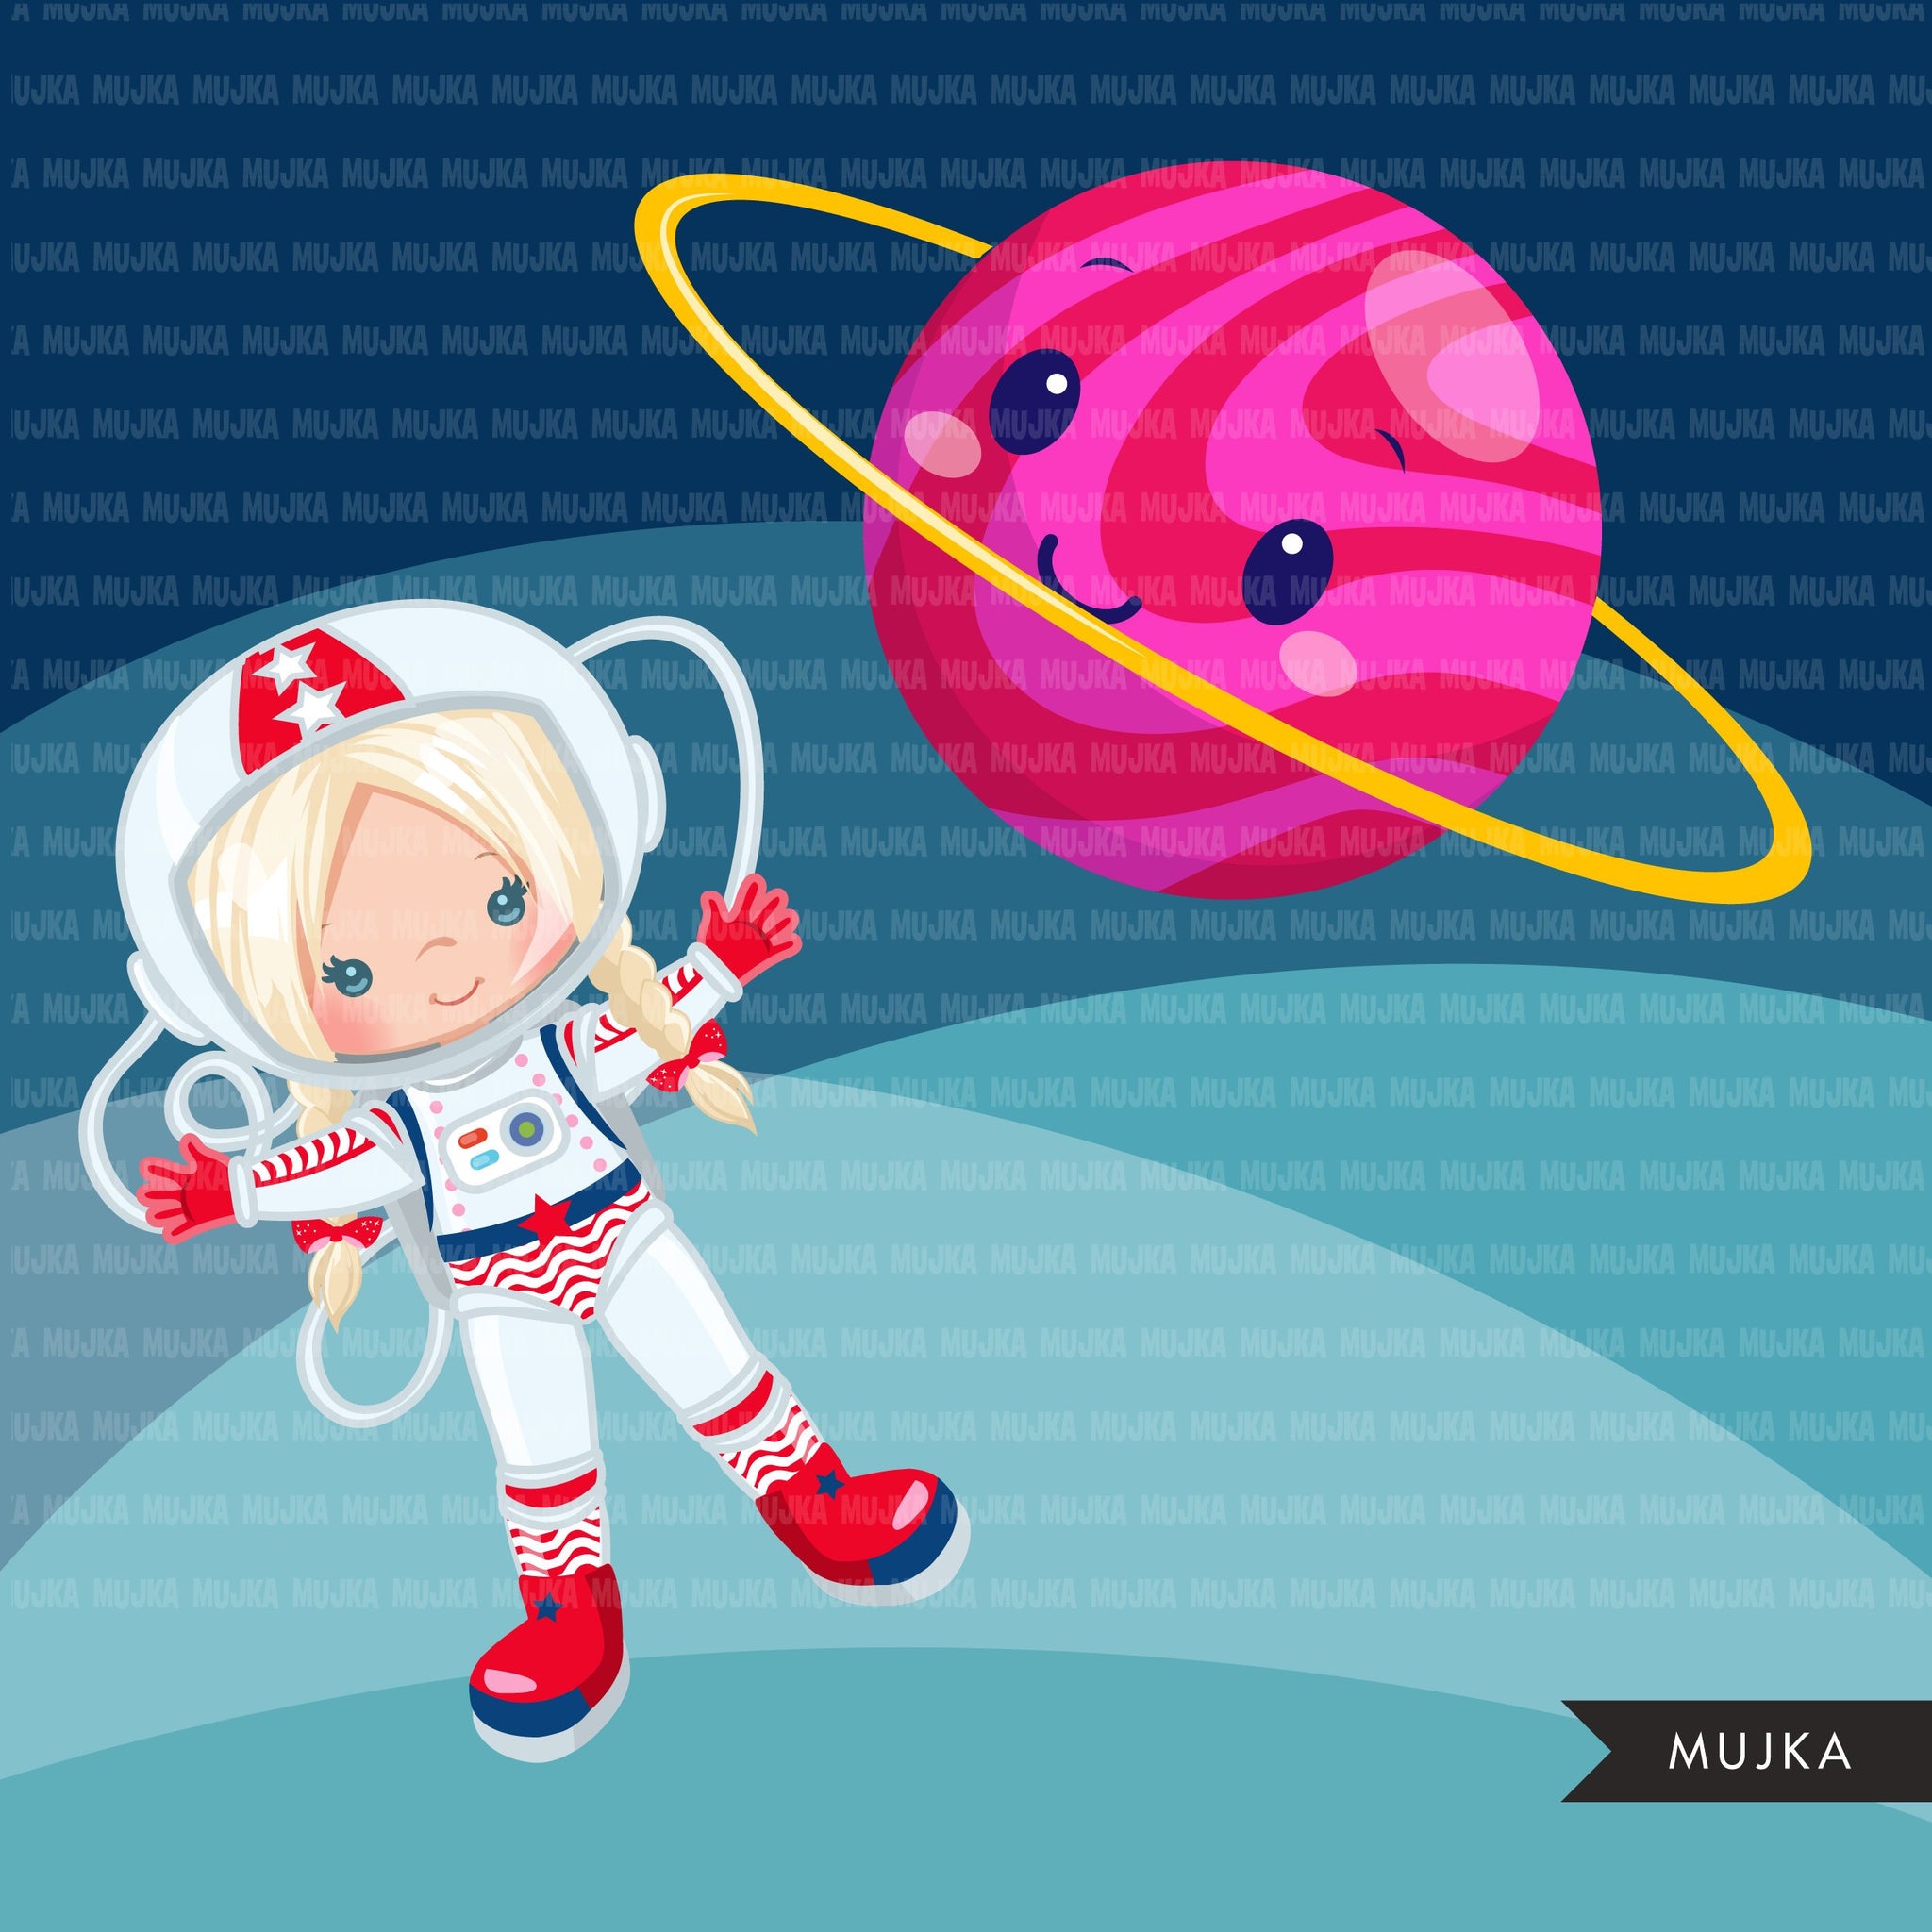 Space solar system clipart with boy and girl astronauts & cute planets